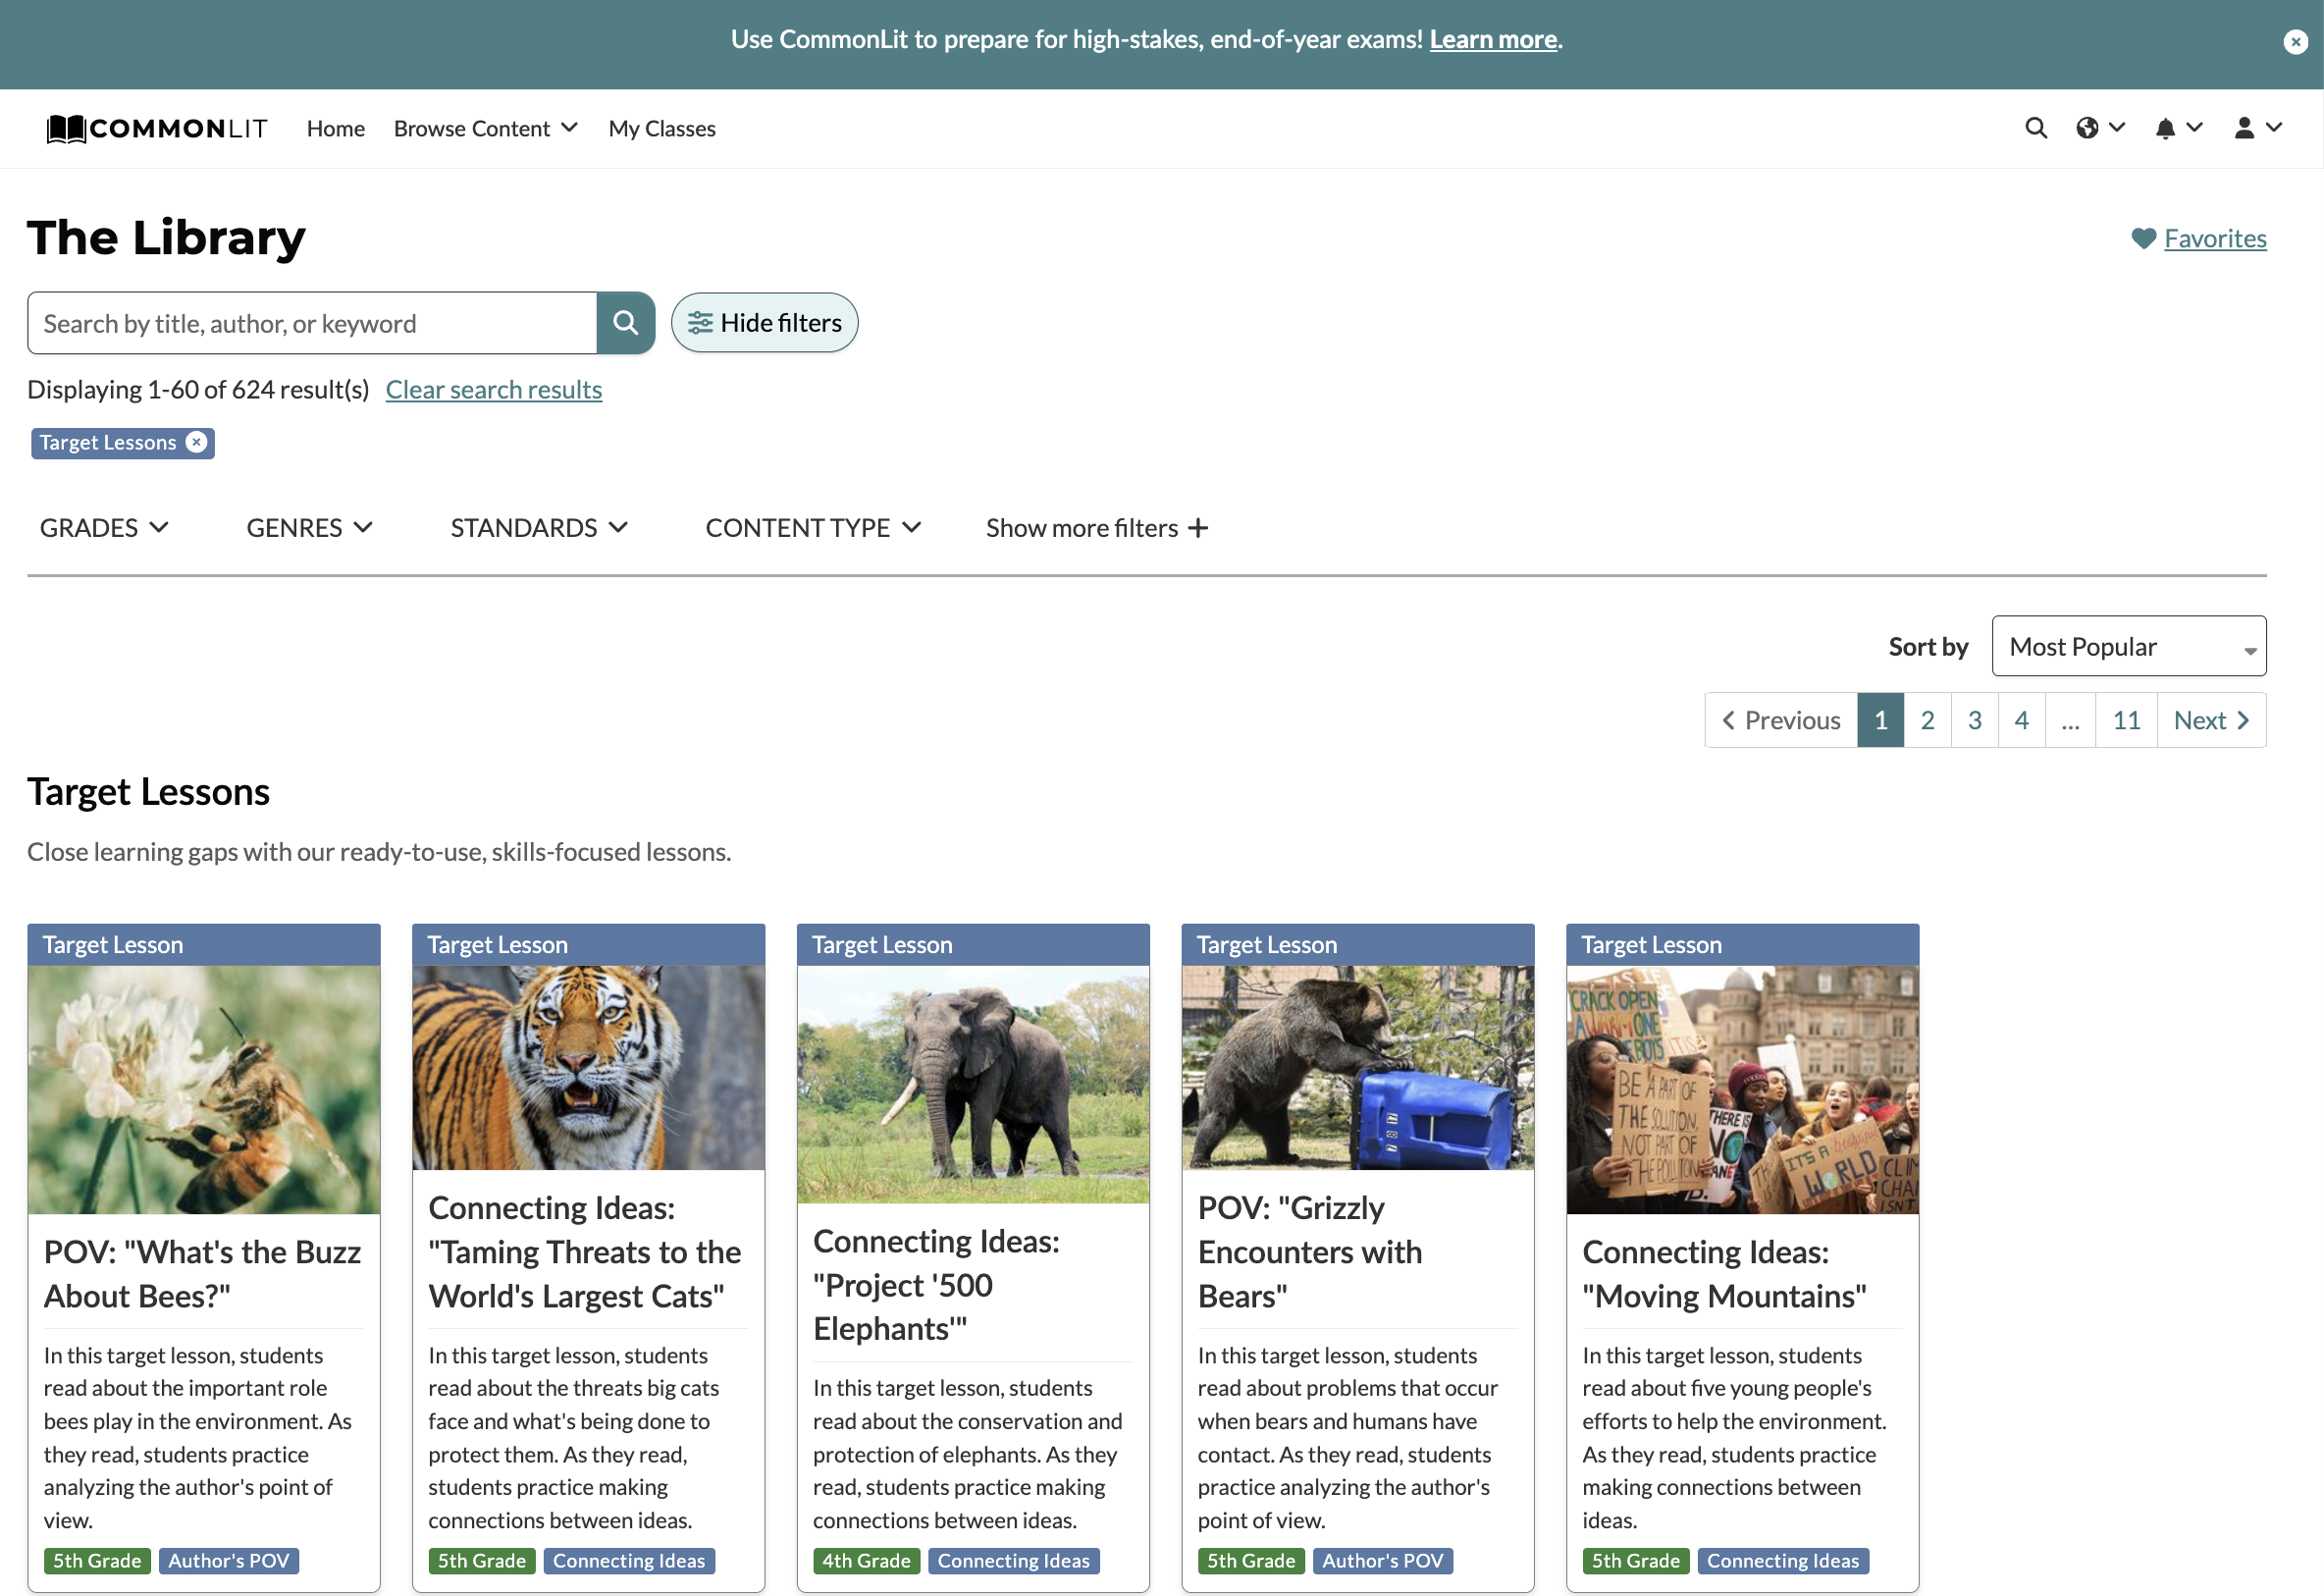 CommonLit Library with Target Lessons page highlighted